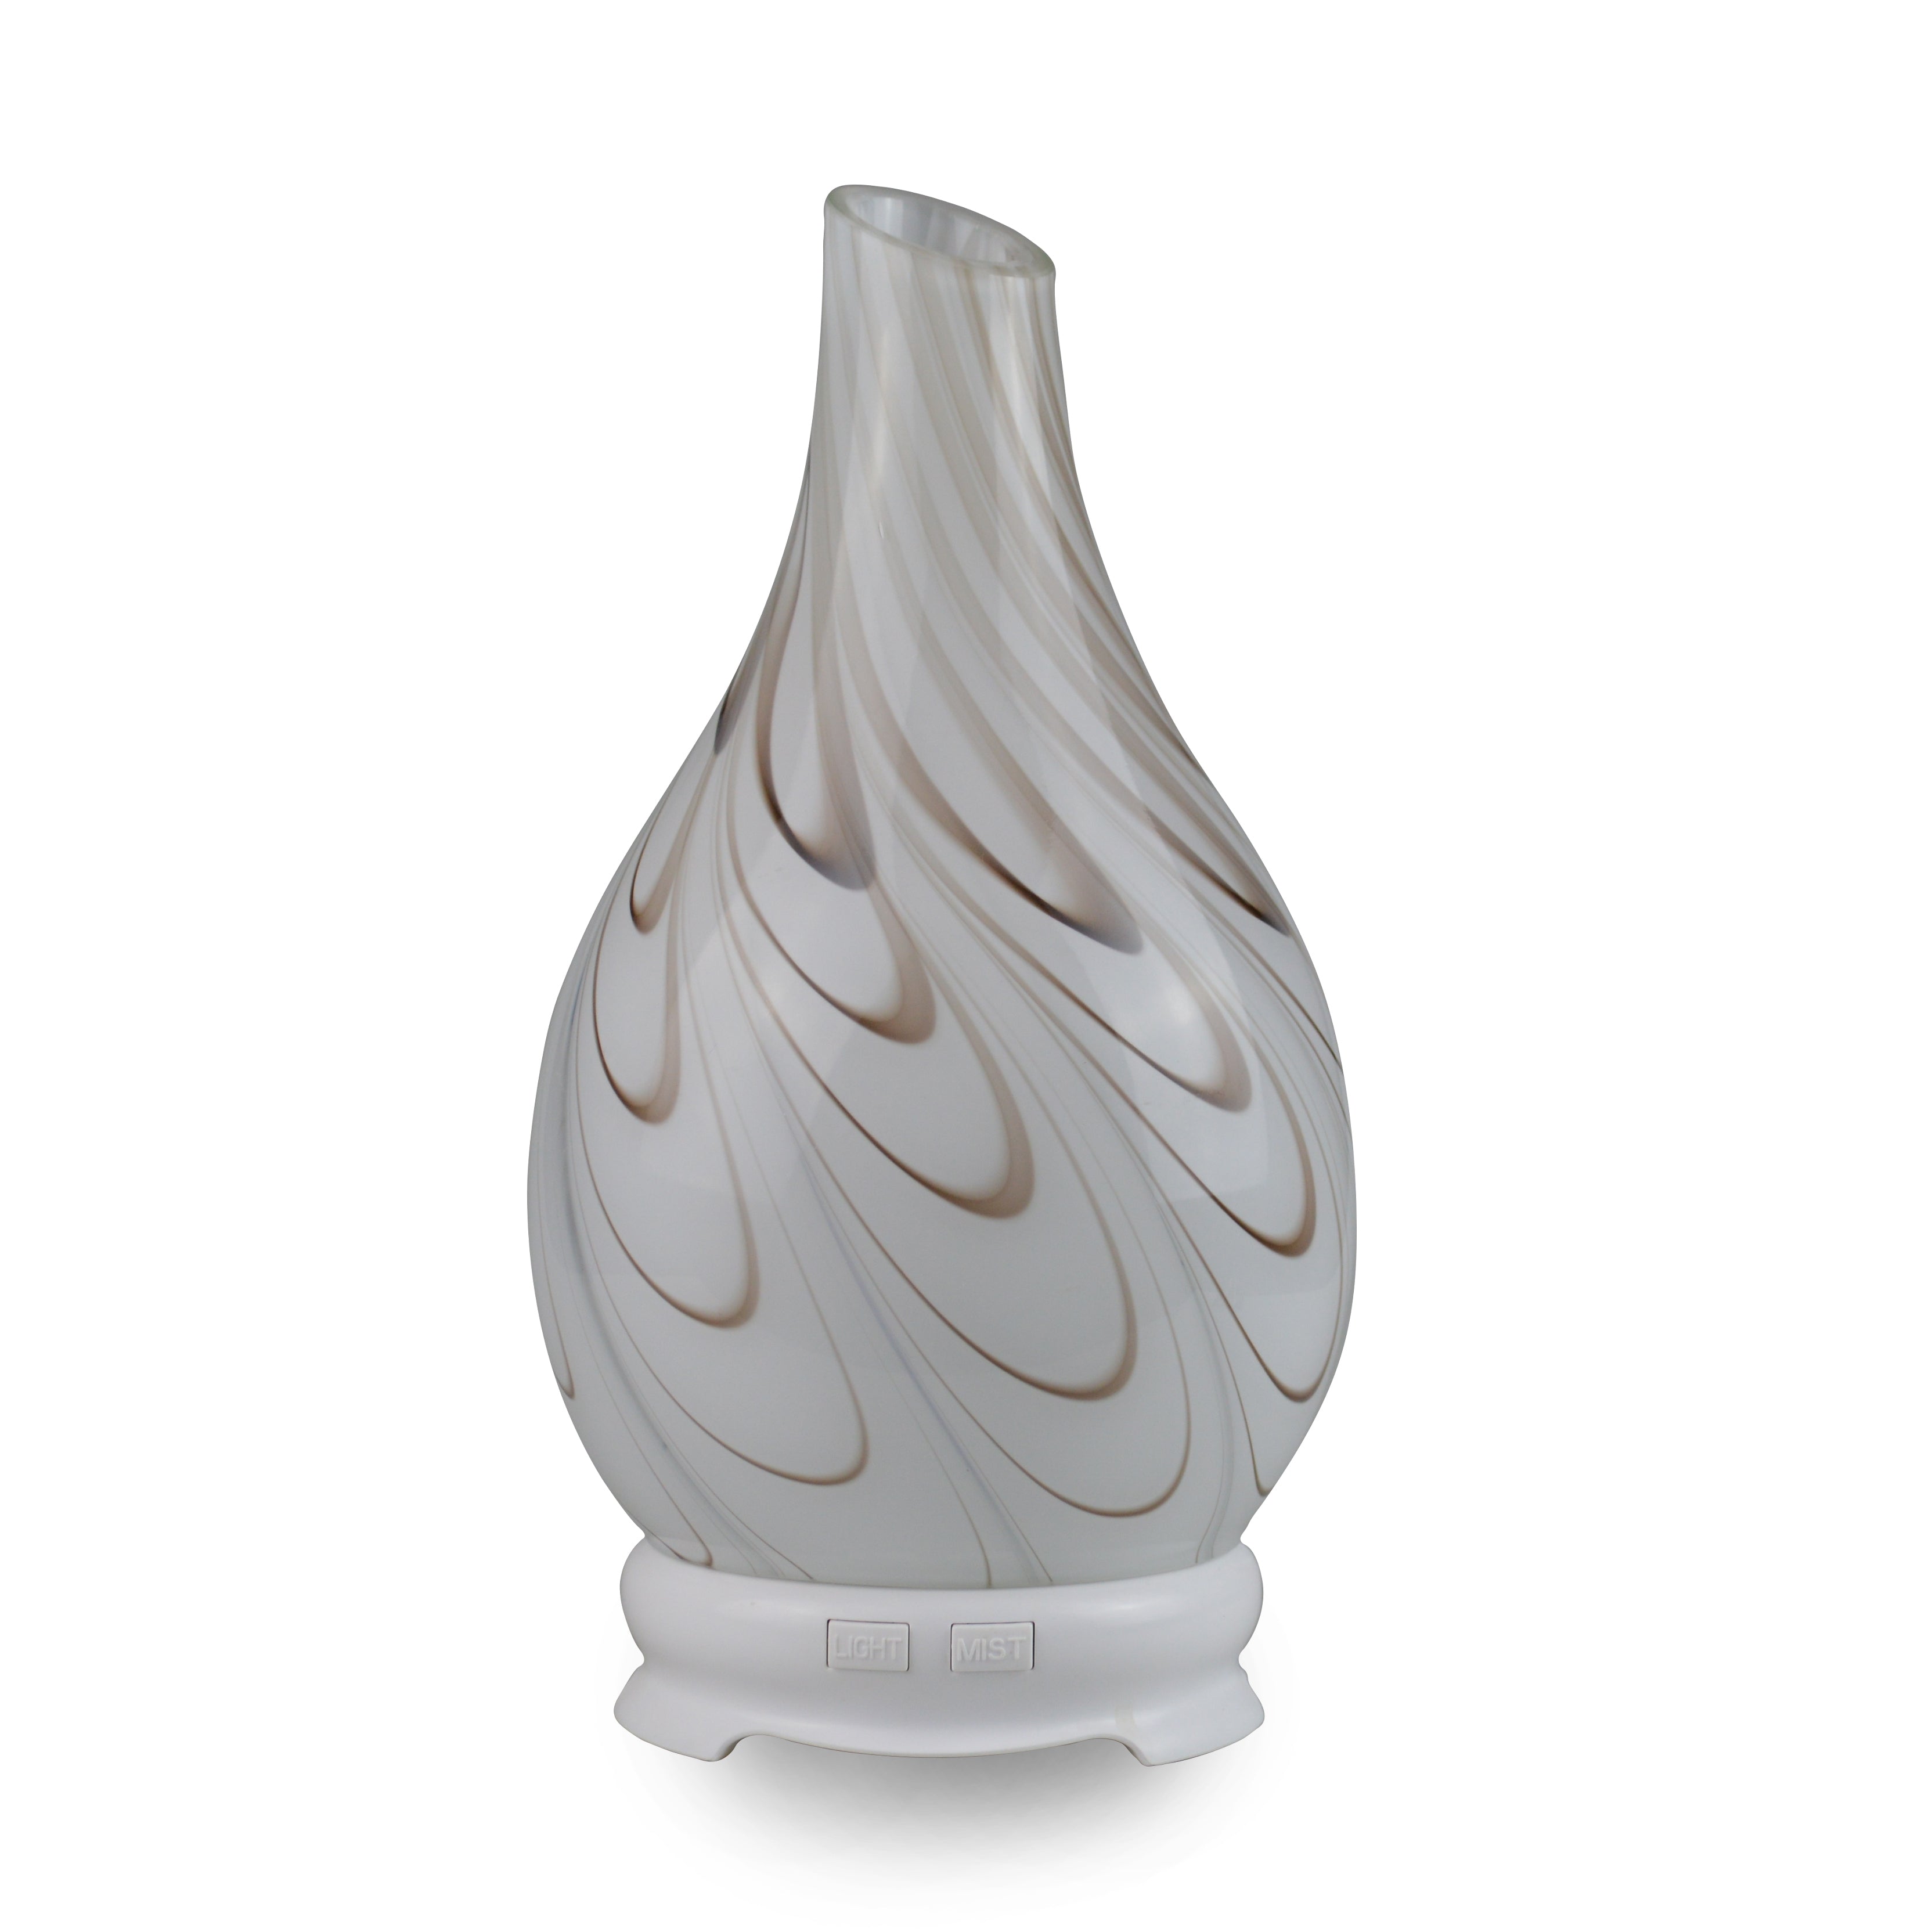 This Galaxy Swirl essential oil diffuser brings a modern look to any room with its swirling blend of red and brown.